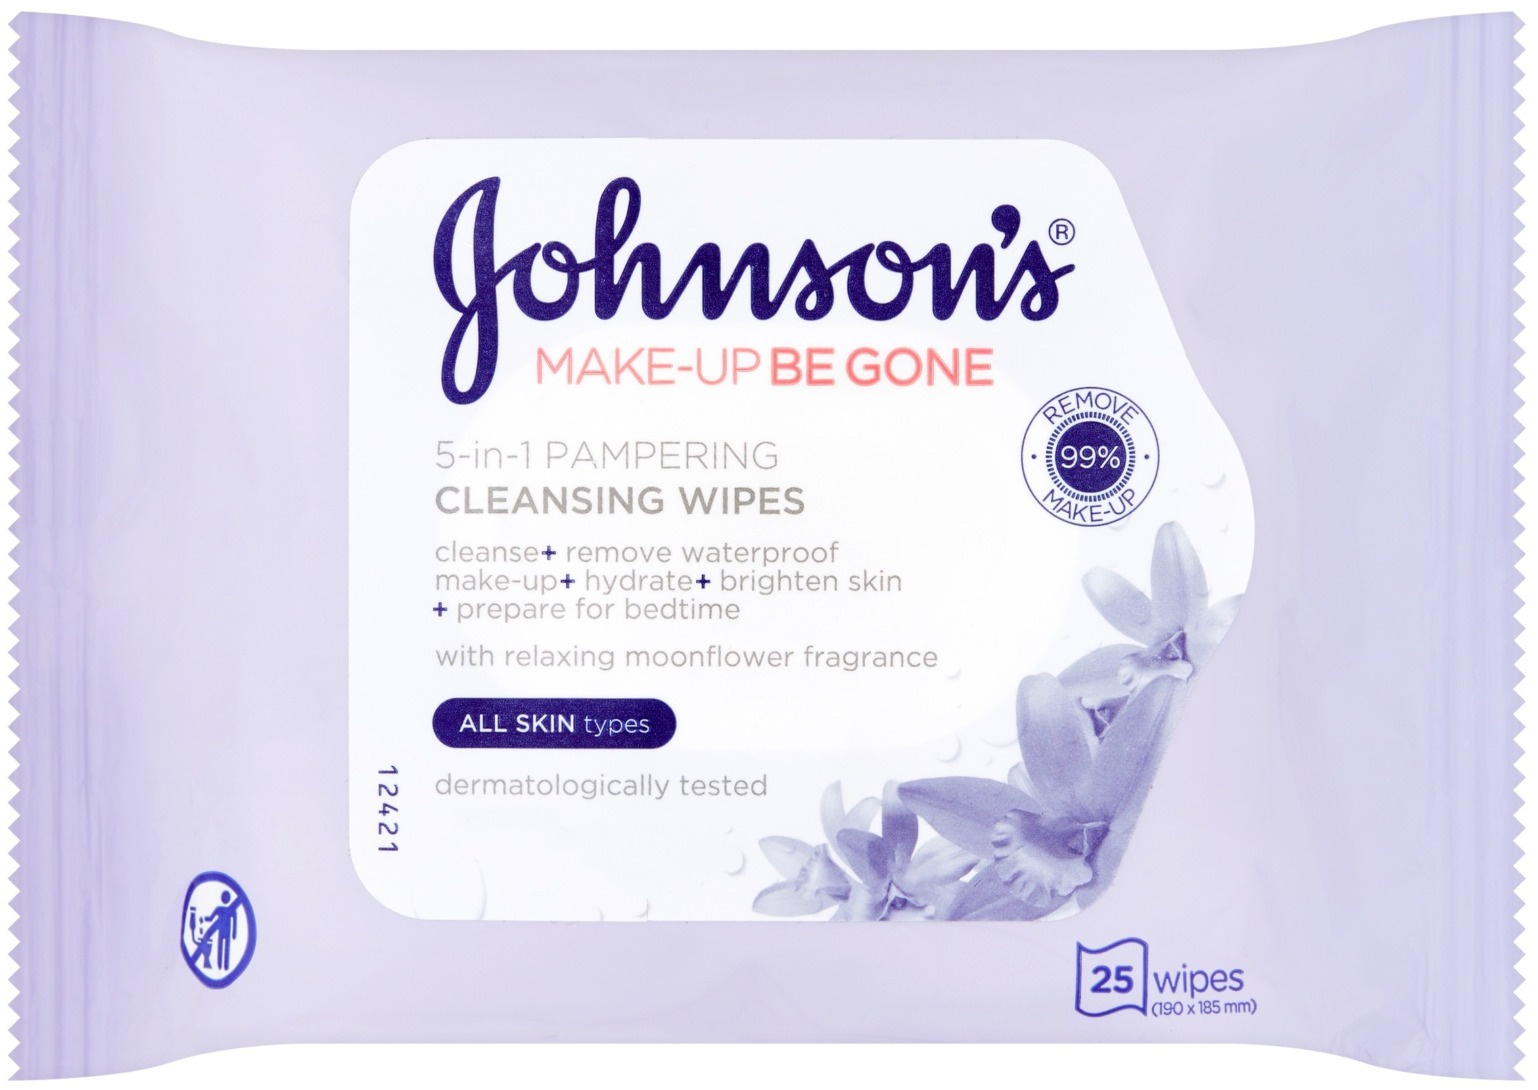 Johnson's Make-up Be Gone 5-in1 Pampering Cleansing Wipes